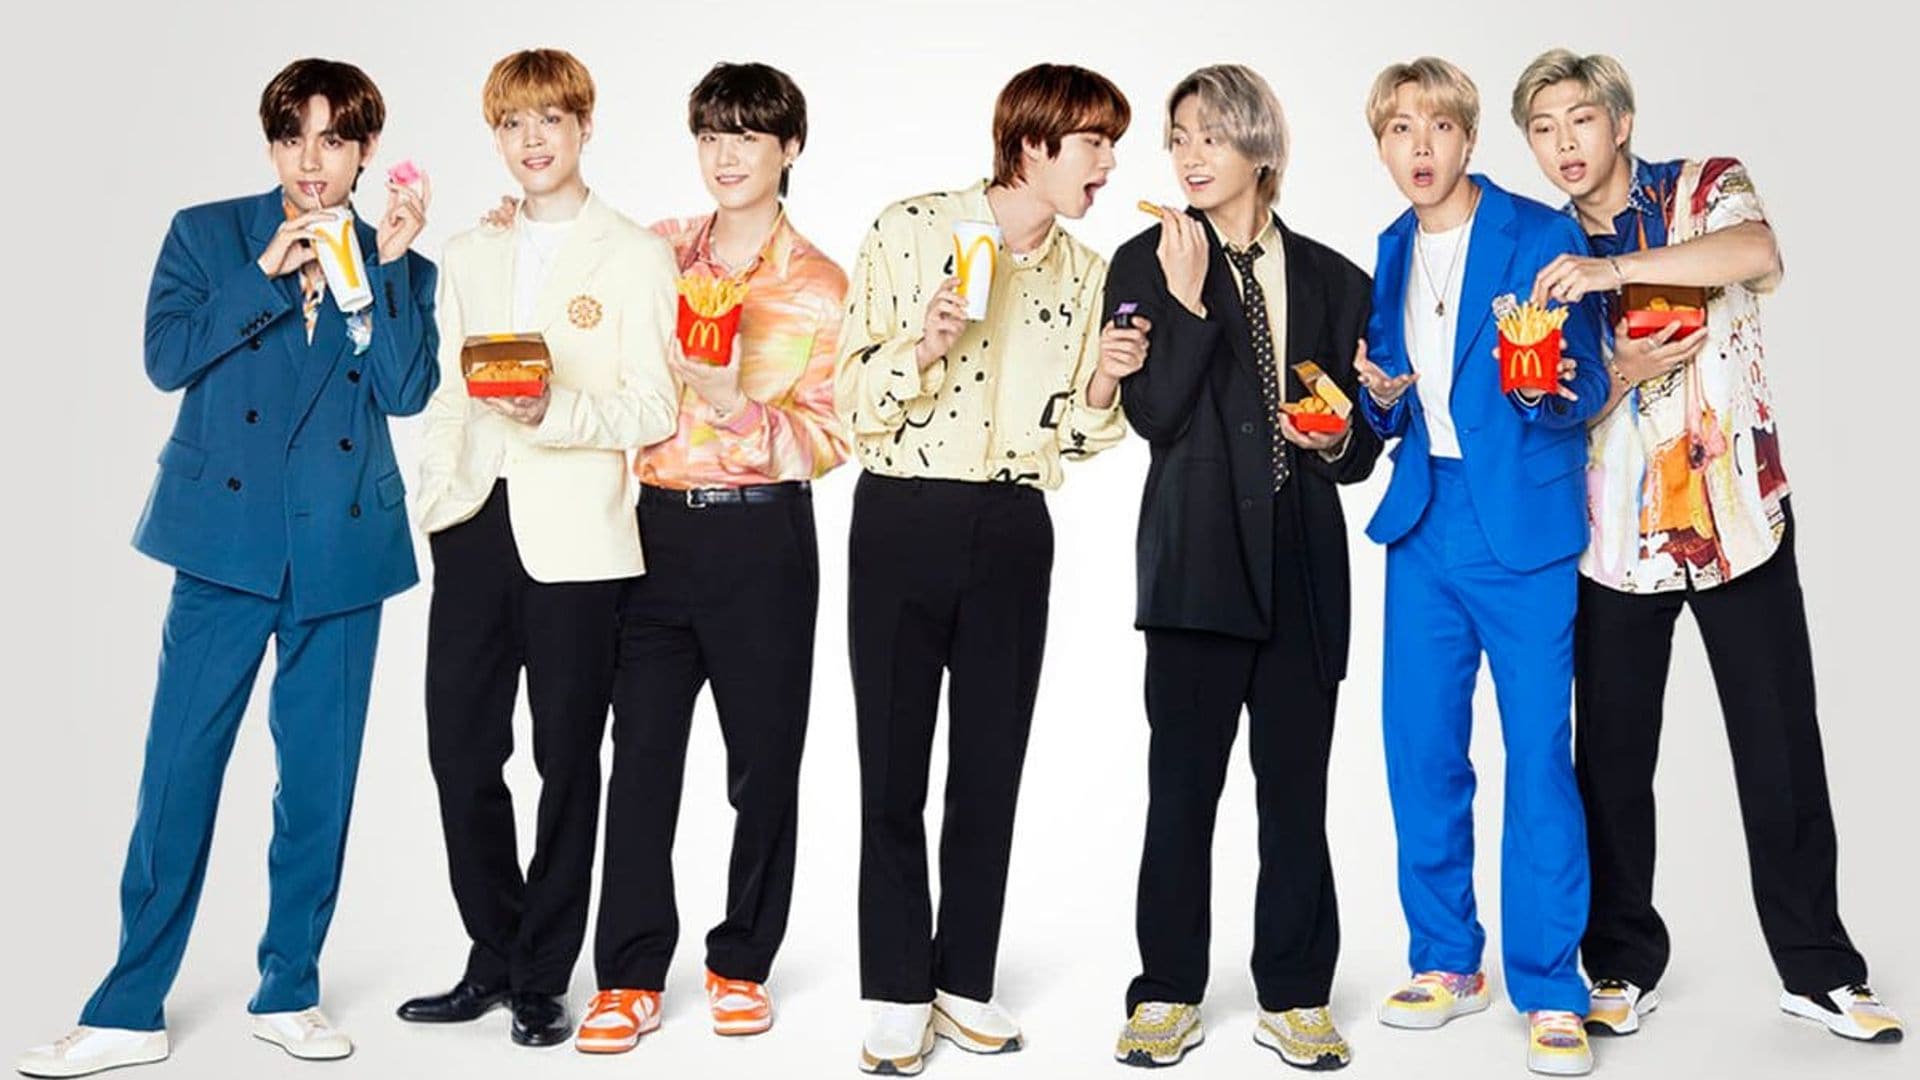 BTS brings South Korean’s flavors and fashion to America with their McDonald’s menu and merch collab